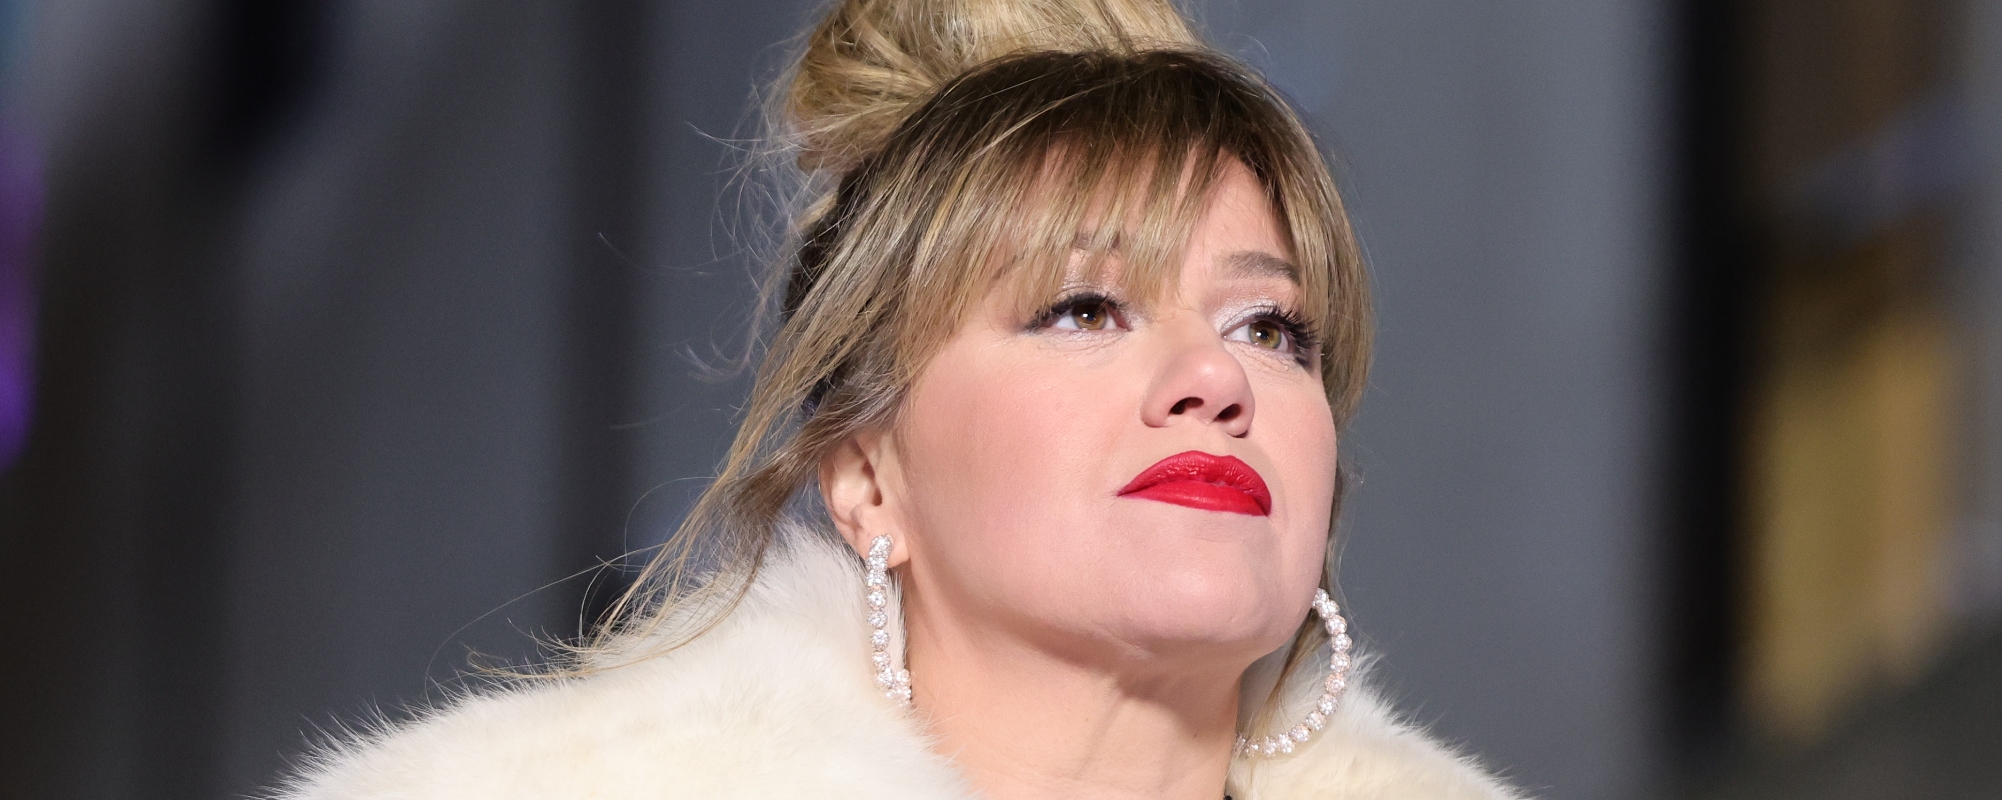 Watch Kelly Clarkson Effortlessly Flaunt Her Vocal Prowess With Prideful U2 Cover